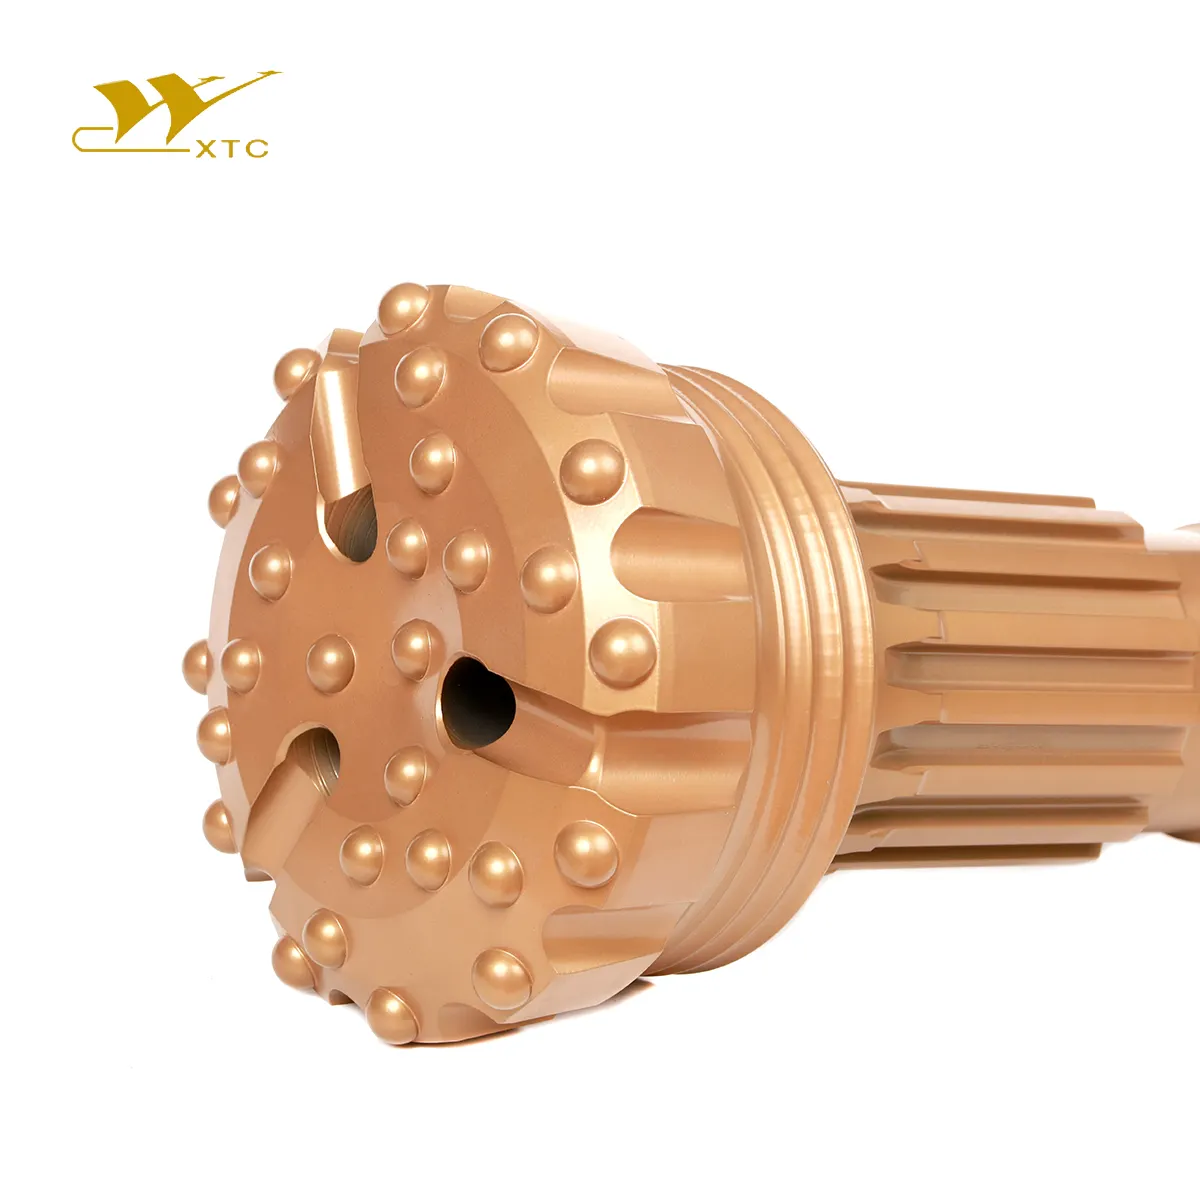 Hammer series High Air Pressure Dth Bit Cemented Carbide Concave Face Hydro-electrical Engineering Etc. Thread Rock Drill Button Hammer Bits Shield cutter